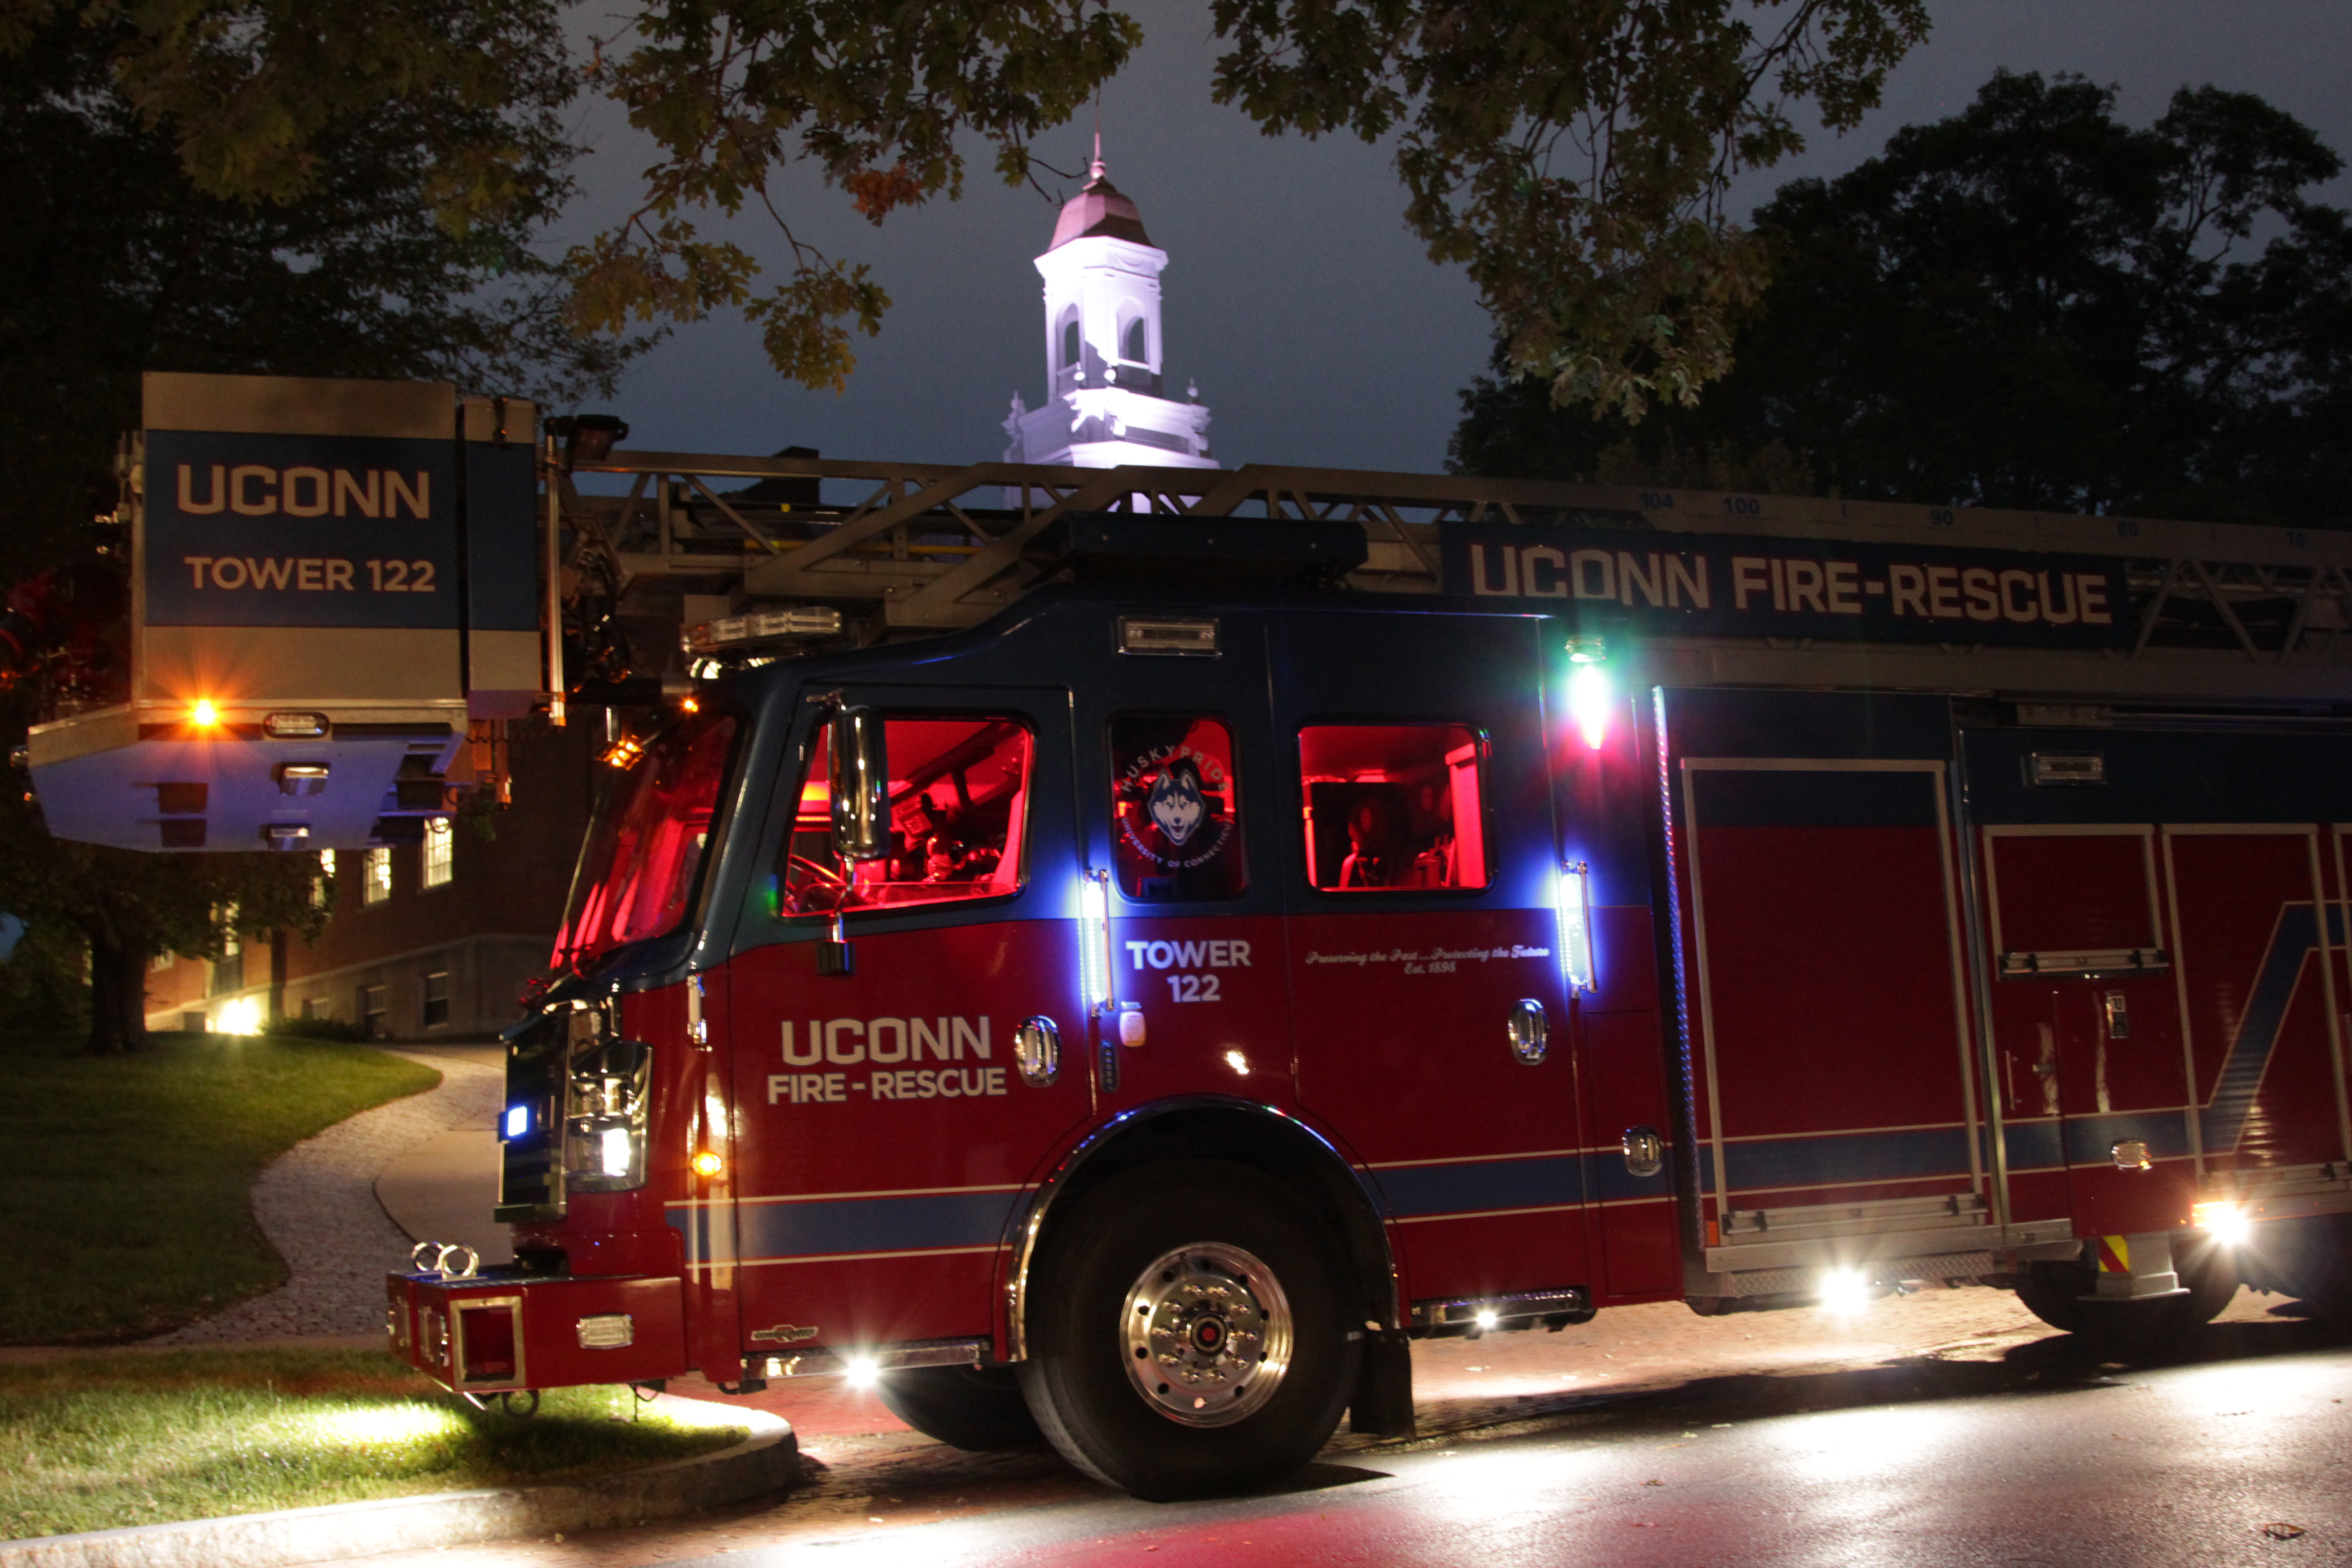 The University recently purchased a new fire tower truck that will enable firefighters to access even the top floor of the highest residence halls. (Rob Babcock/UConn Photo)